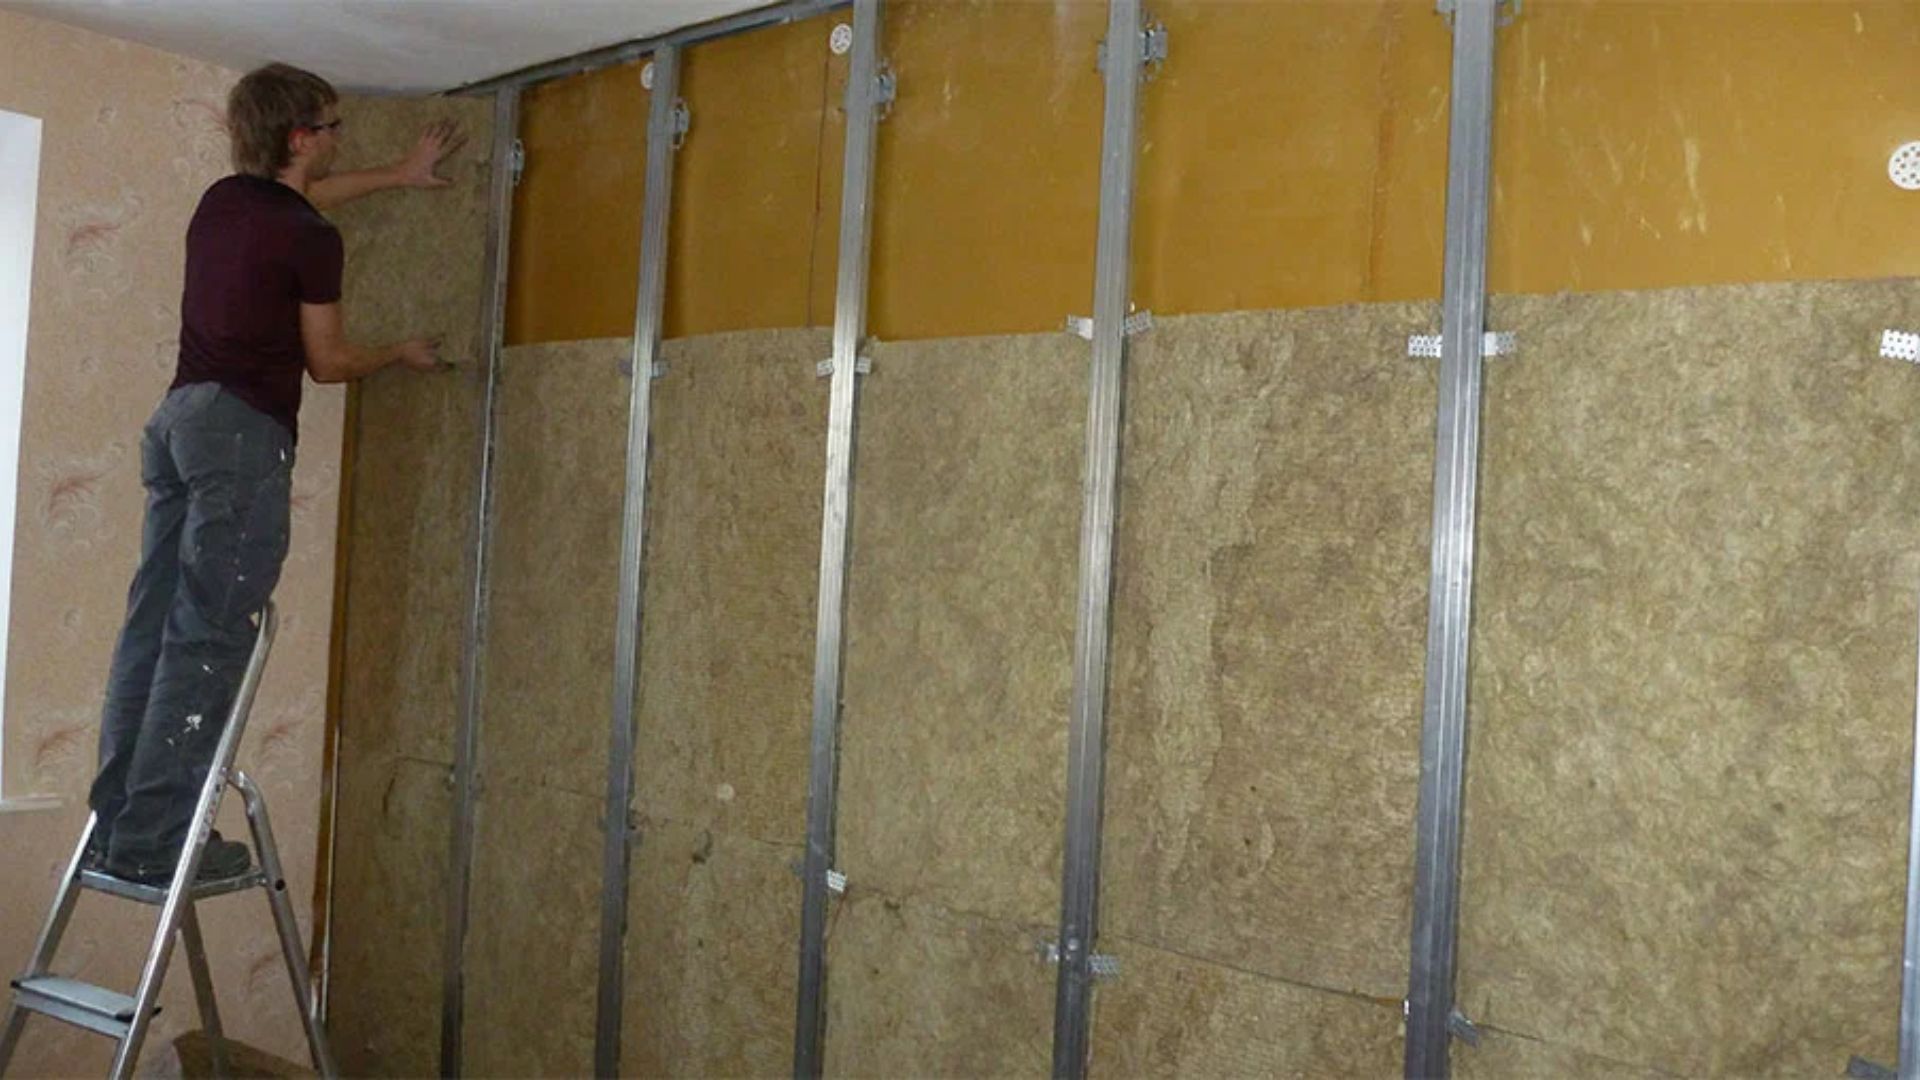 Top 10 Soundproofing Tеchniquеs for Urban Dwеllеrs